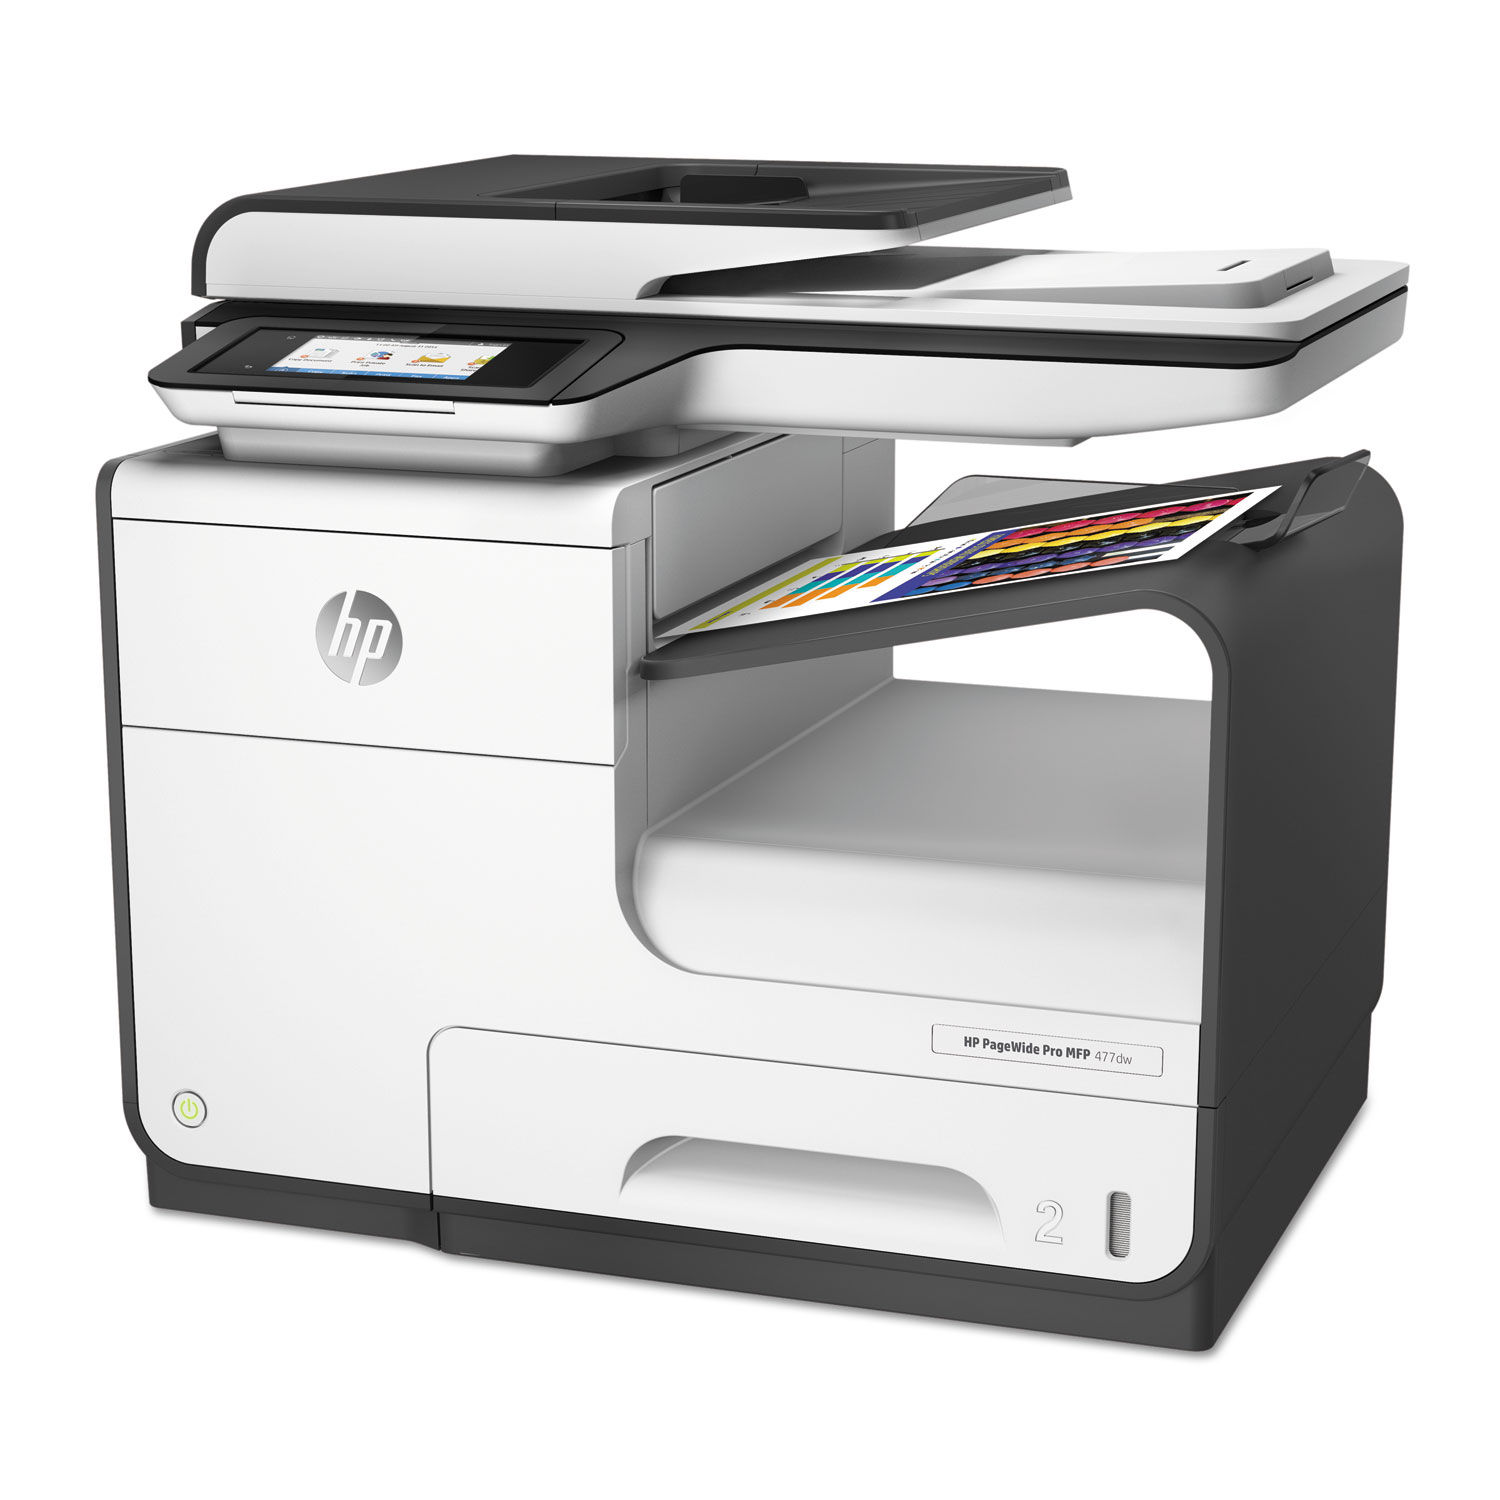 Slovenien Pacific modul PageWide Pro 477dw Multifunction Printer by HP HEWD3Q20A |  OnTimeSupplies.com